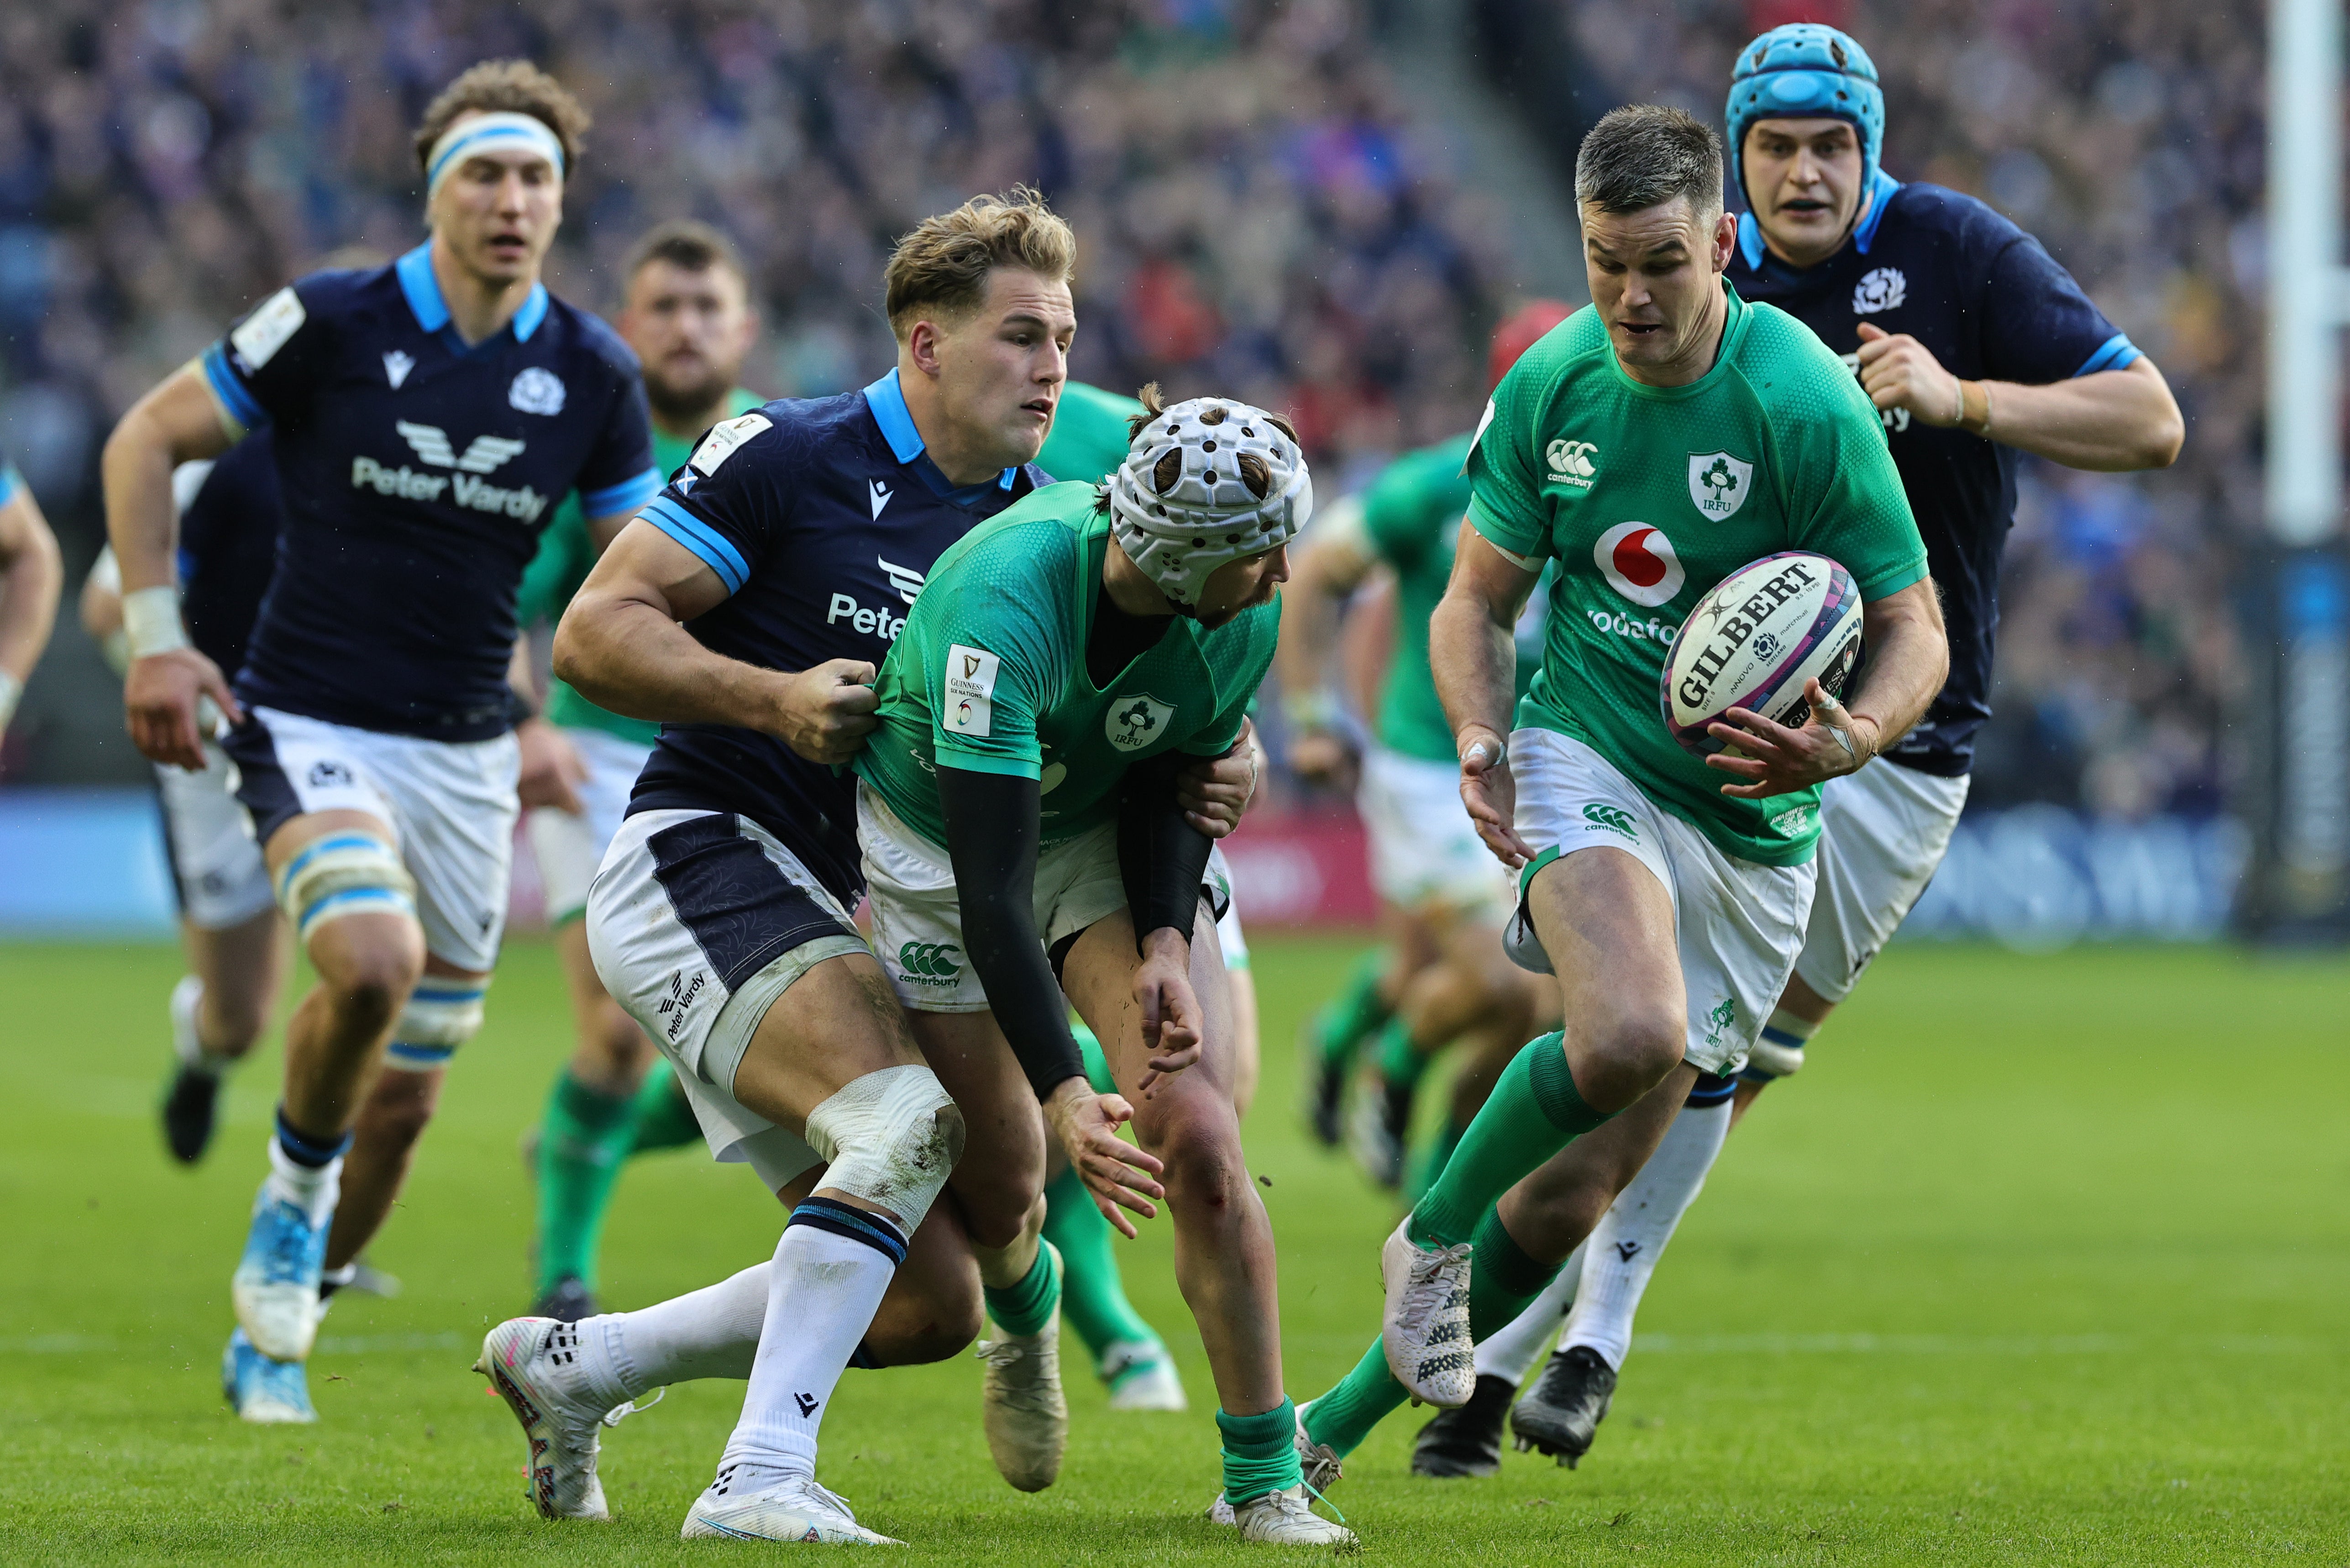 Ireland and Scotland meet in Paris with a last eight place on the line